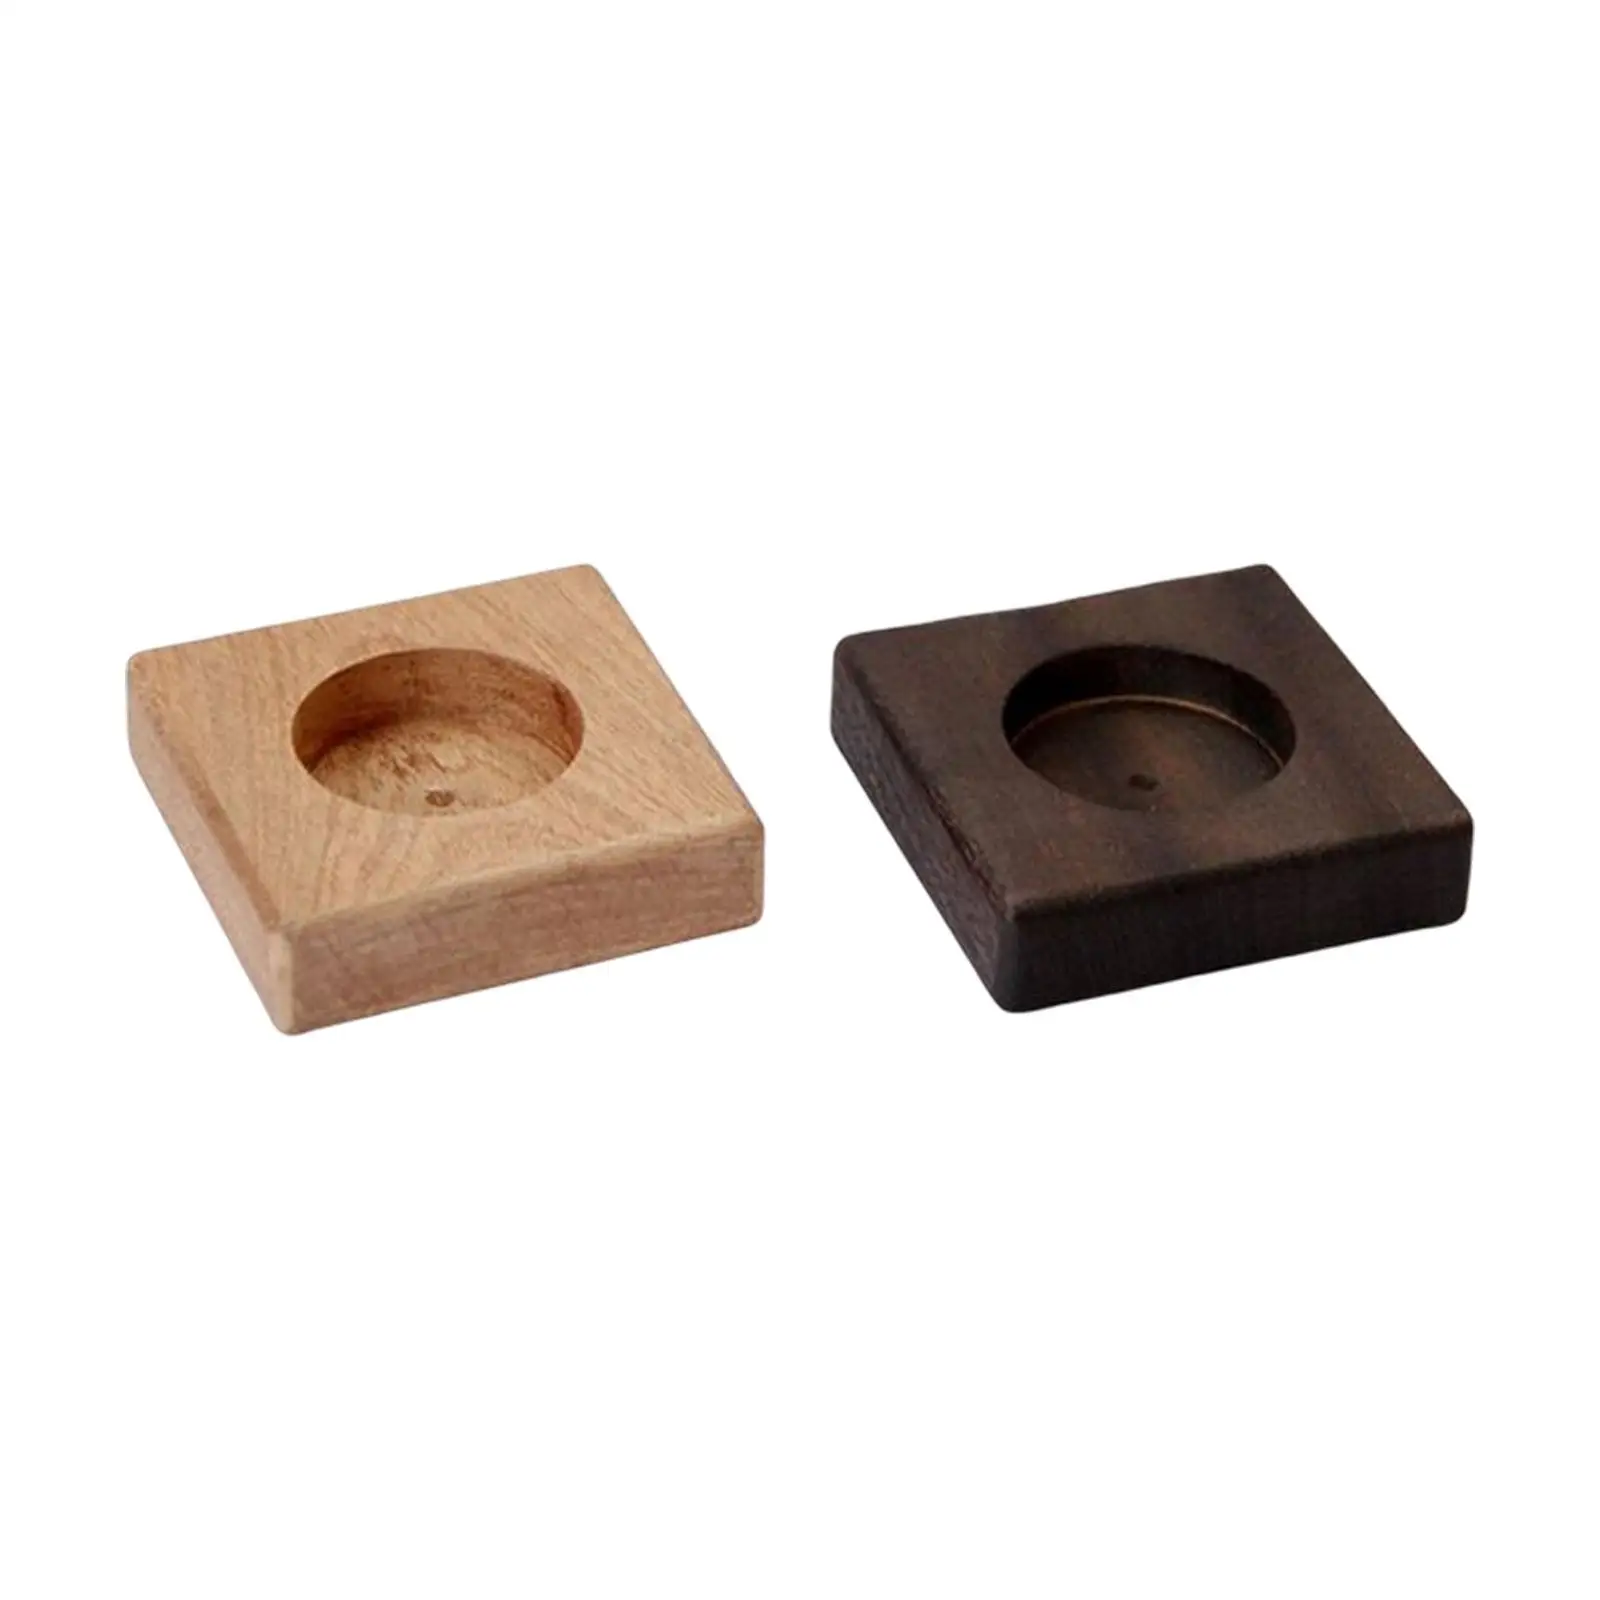 Wooden Candle Holder Small Tea Light Holders Candle Stand for Living Room